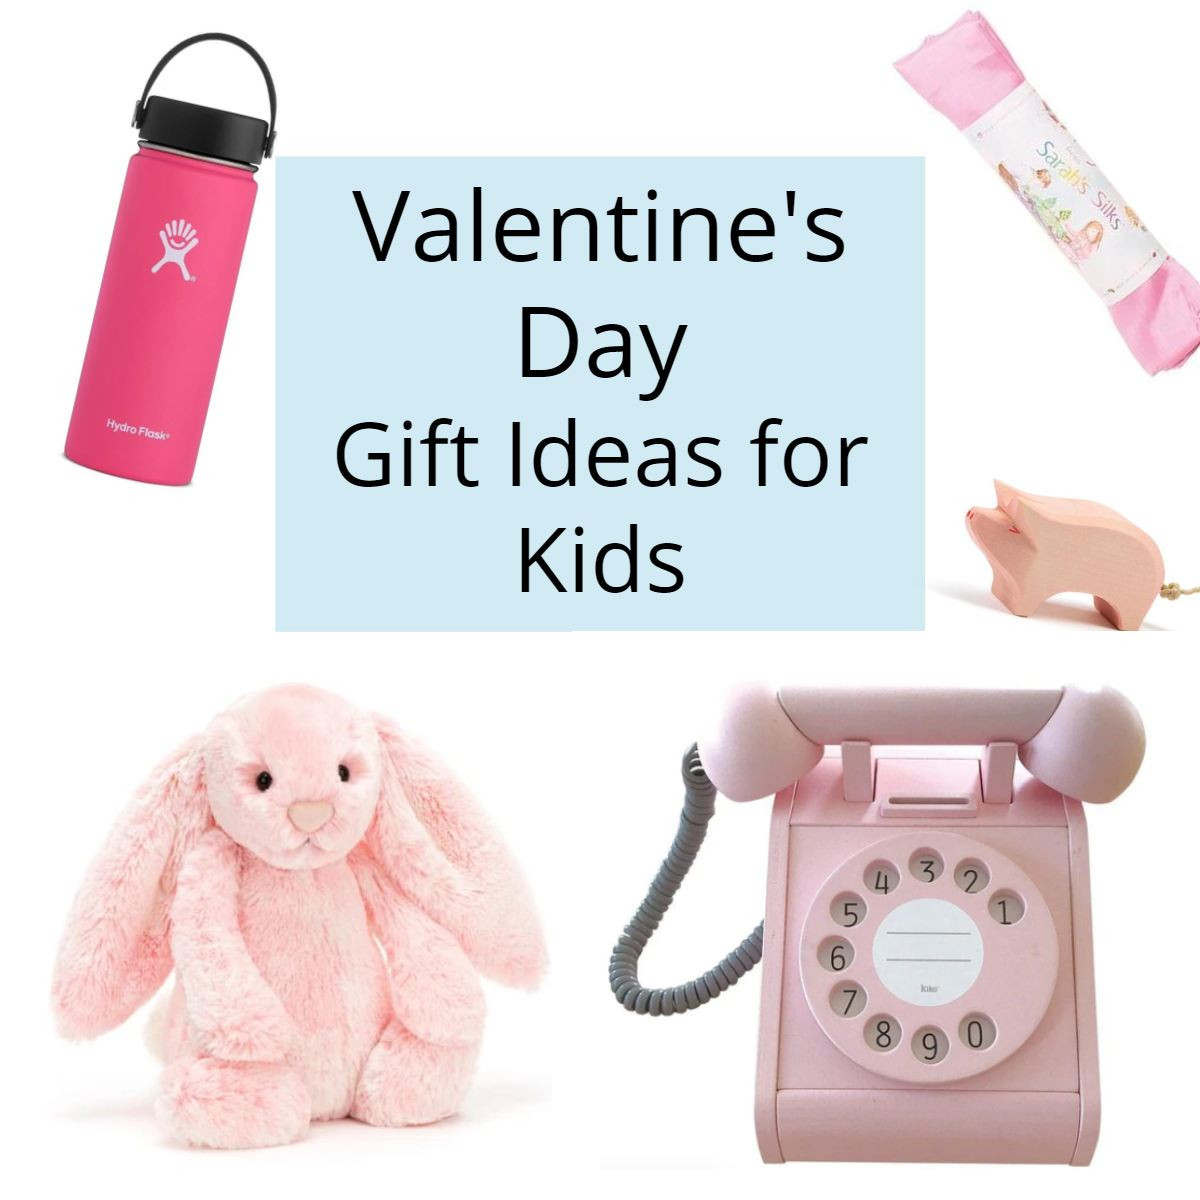 Gift Ideas For Kids 2020
 Valentine s Day Gift Ideas for Kids 2020 The Modern